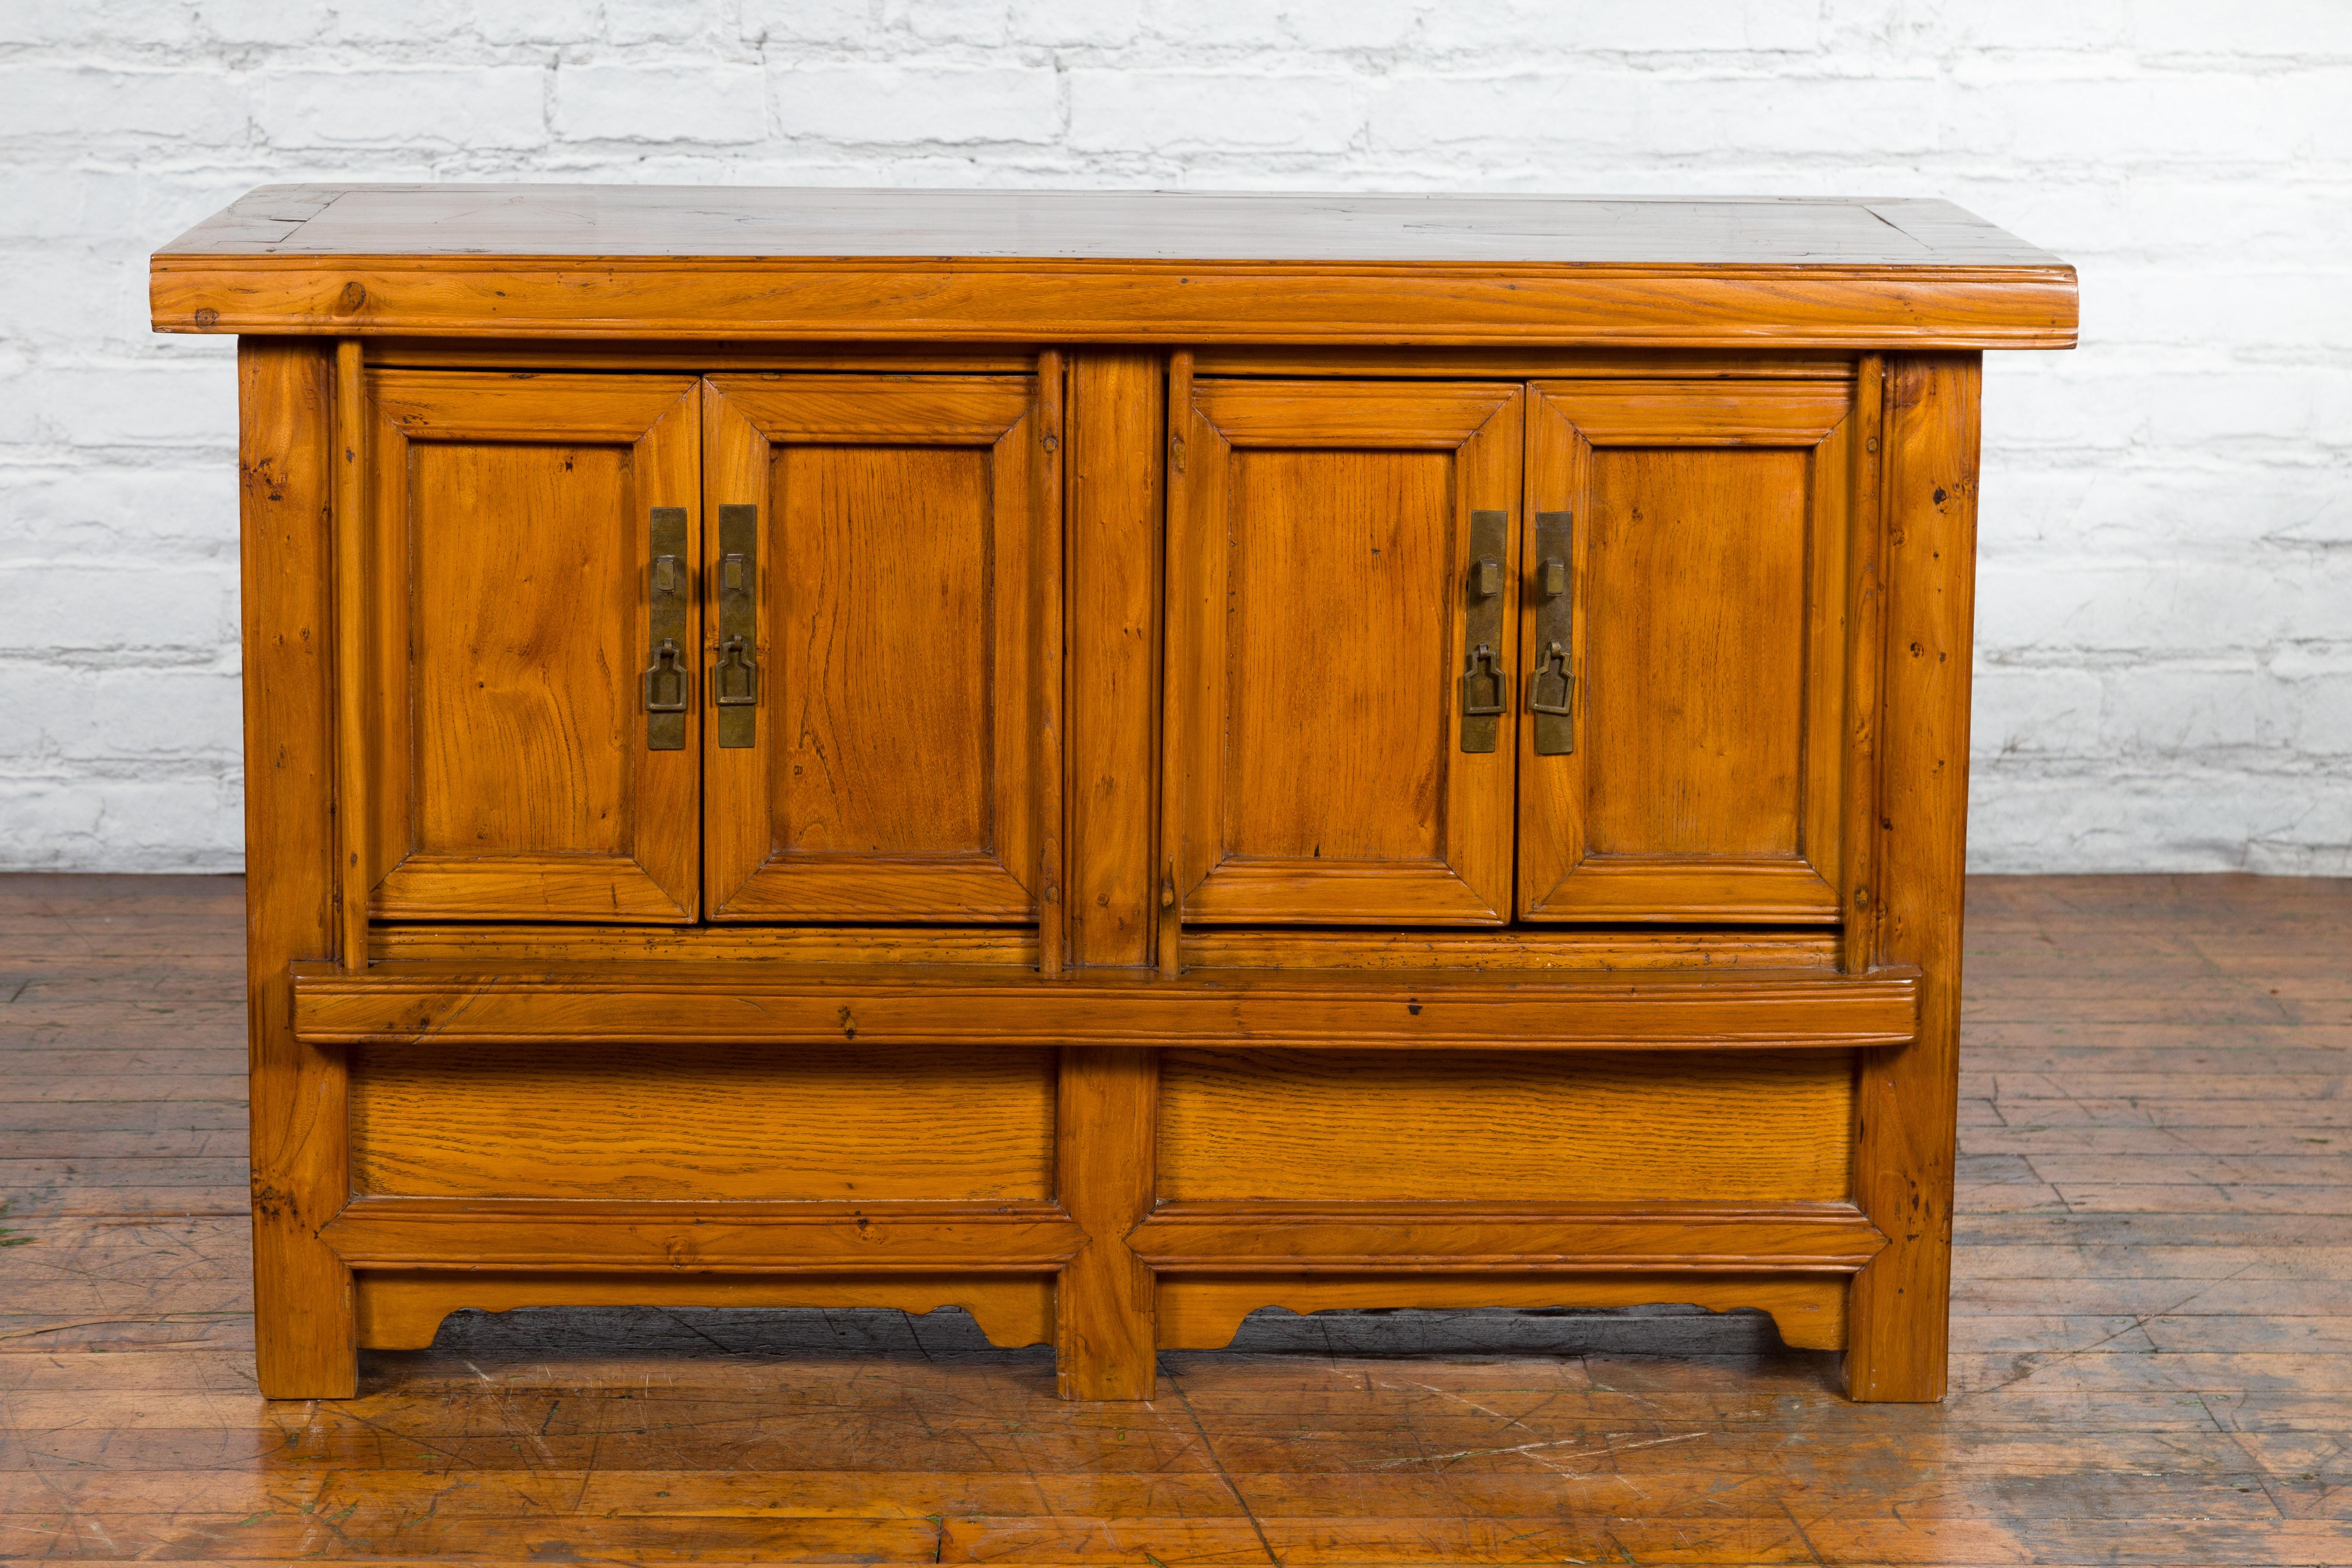 An antique Chinese wooden console cabinet from the early 20th century, with four doors, inner shelves, removable compartments and carved aprons. Created in China during the early years of the 20th century, this console cabinet features a rectangular